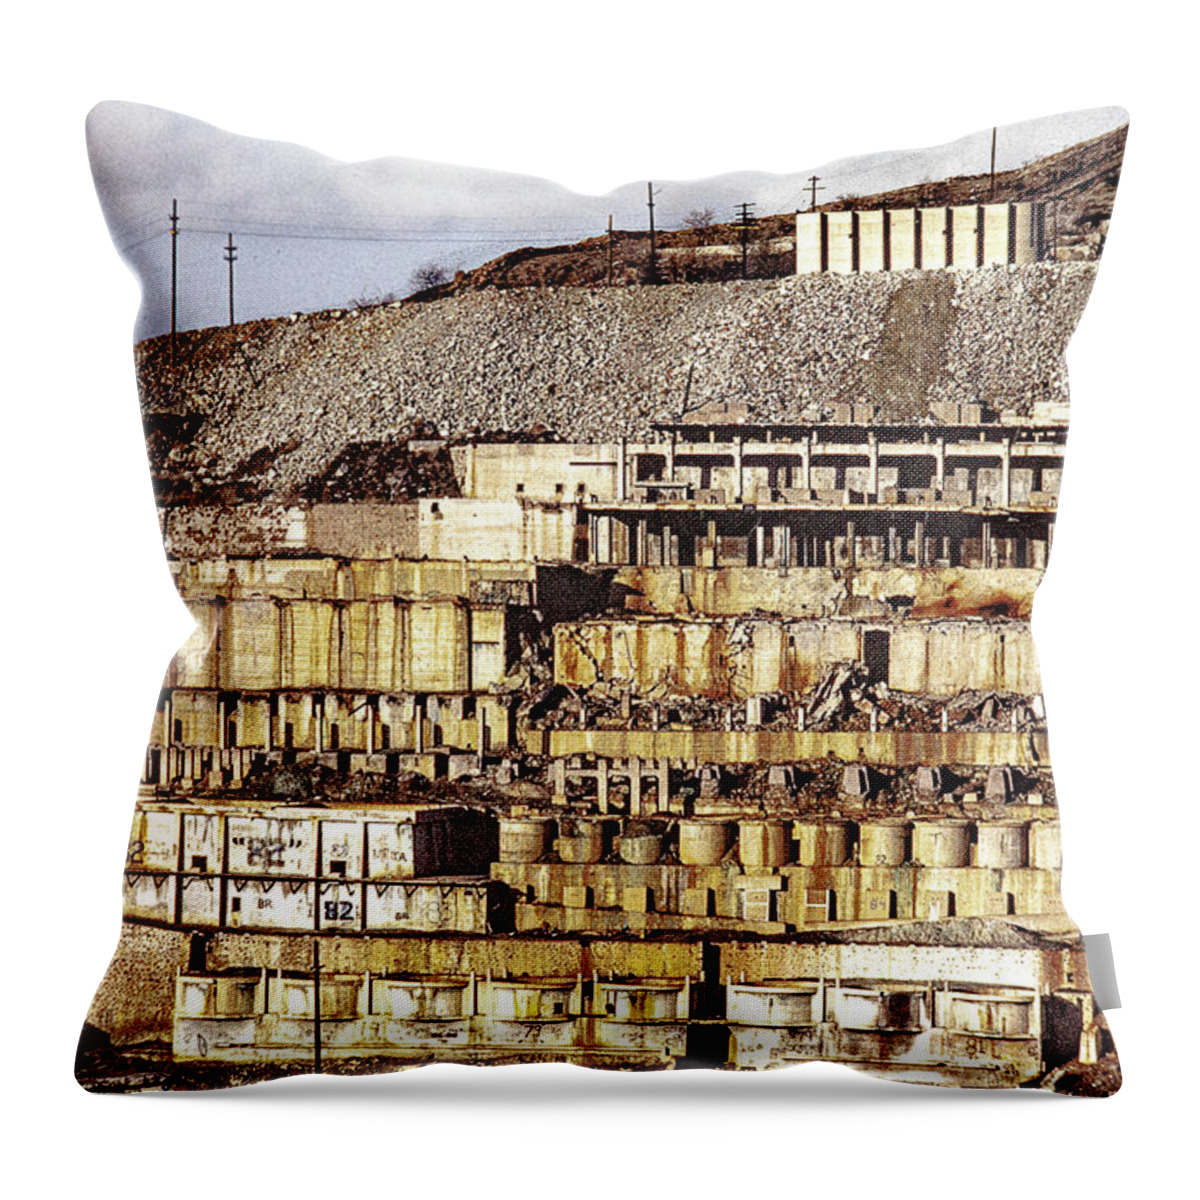 Photograph Throw Pillow featuring the photograph Old Morenci Ruins by John A Rodriguez